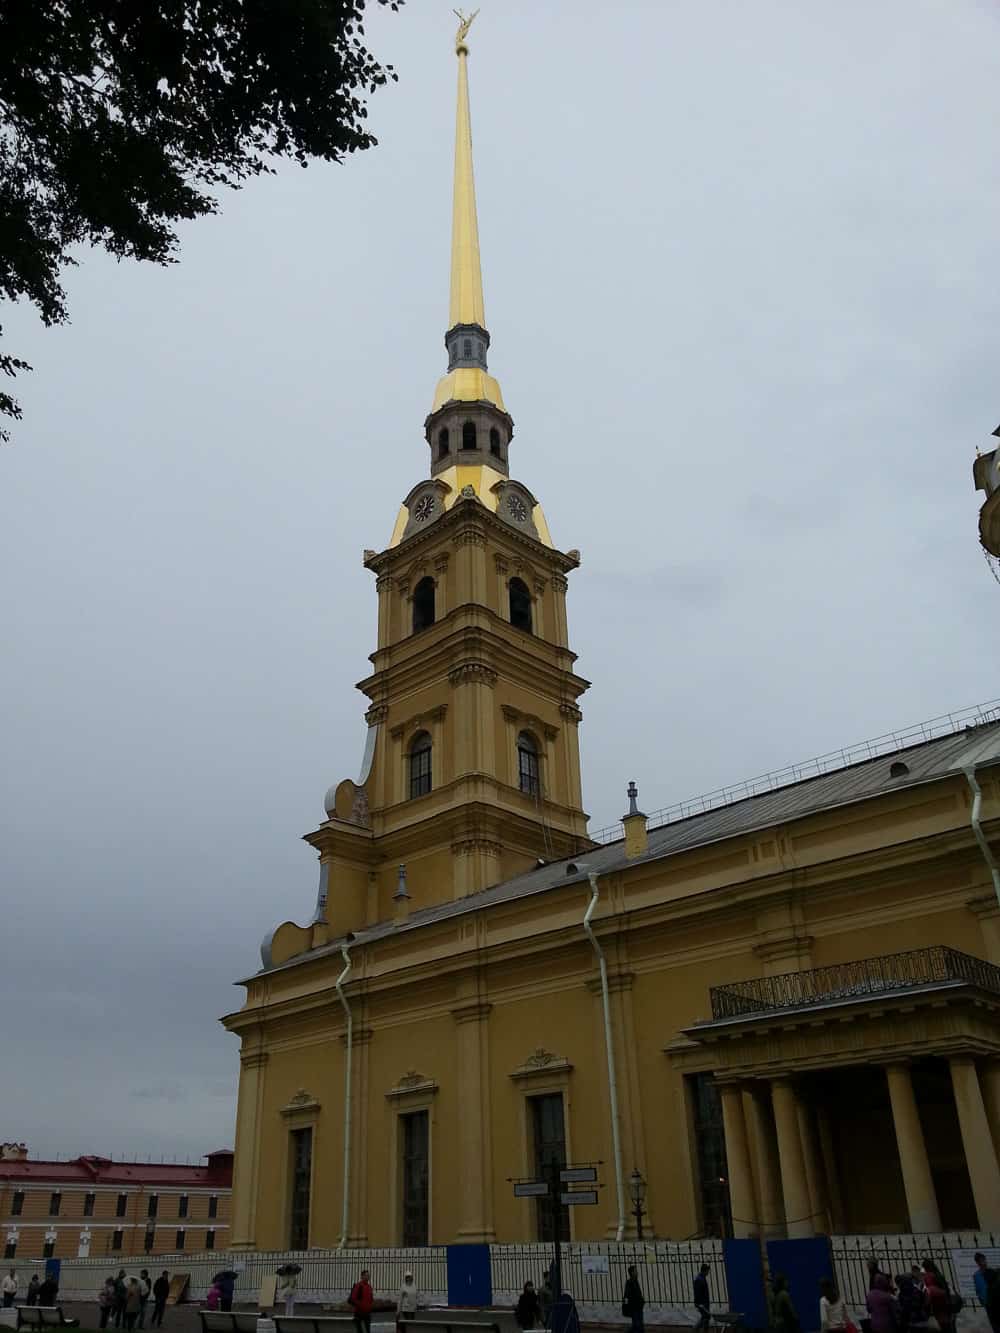 Saints Peter and Paul Cathedral